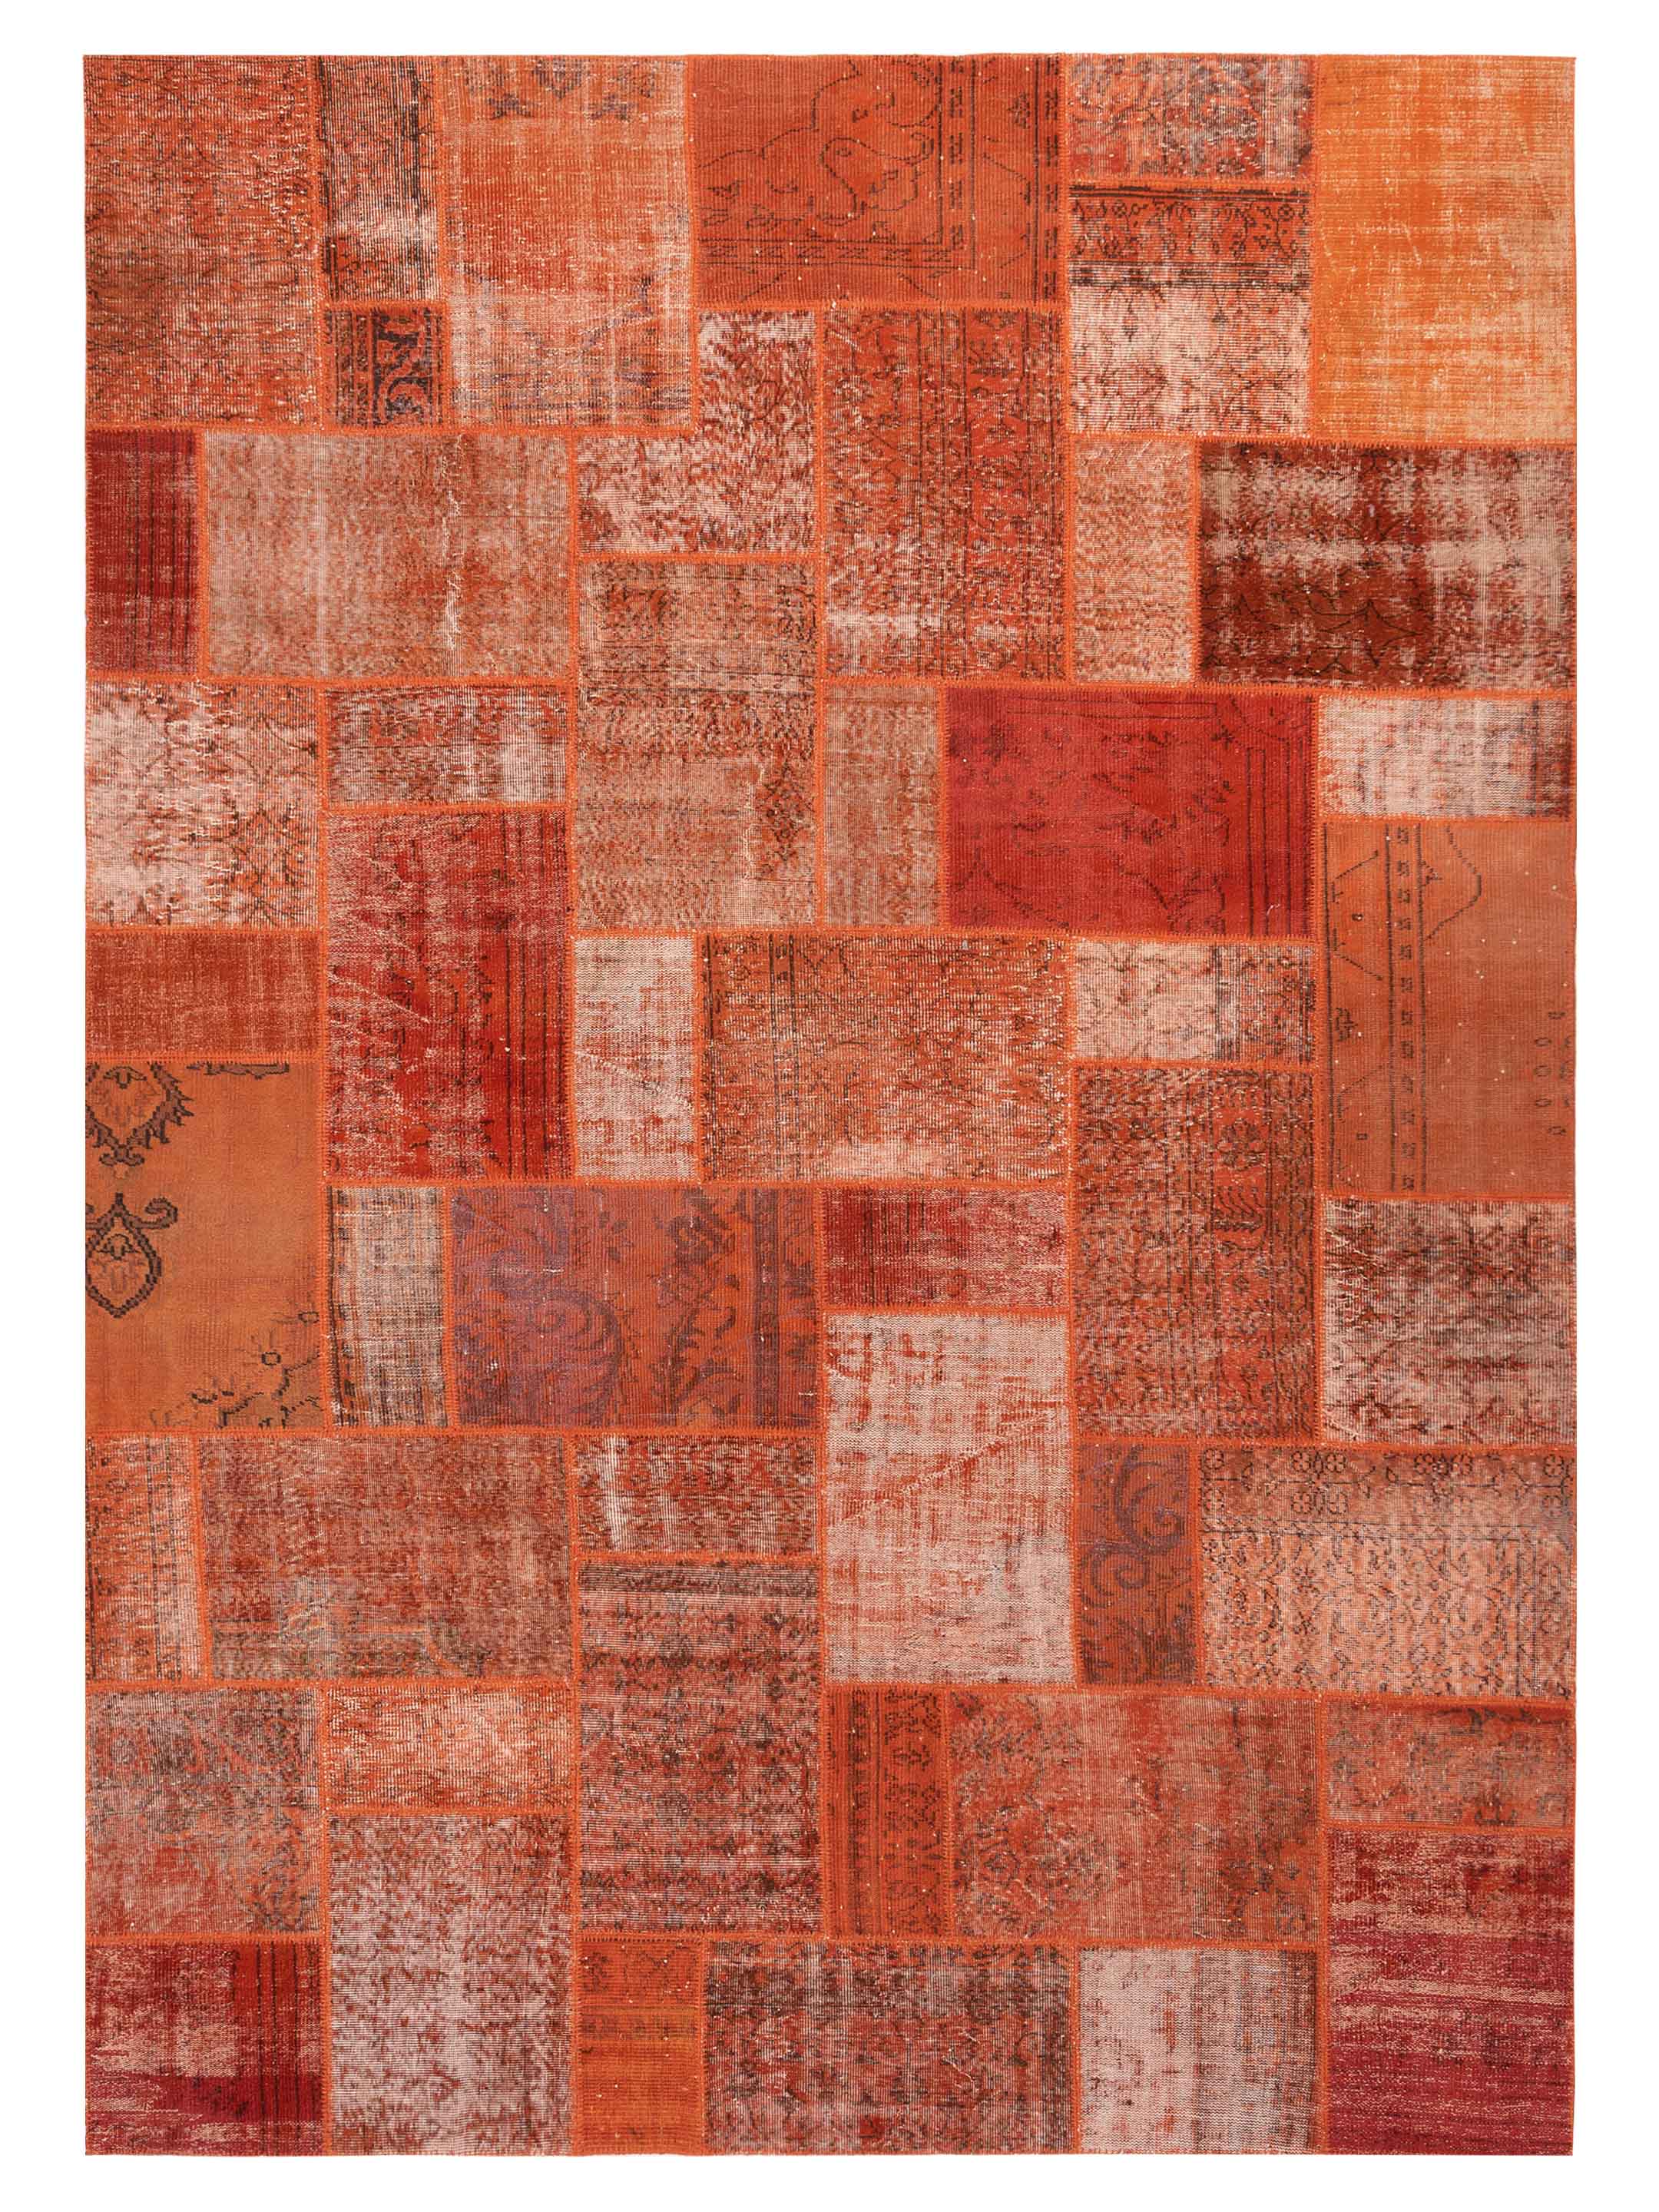 Red rust orange patchwork hand-knotted Turkish area rug	